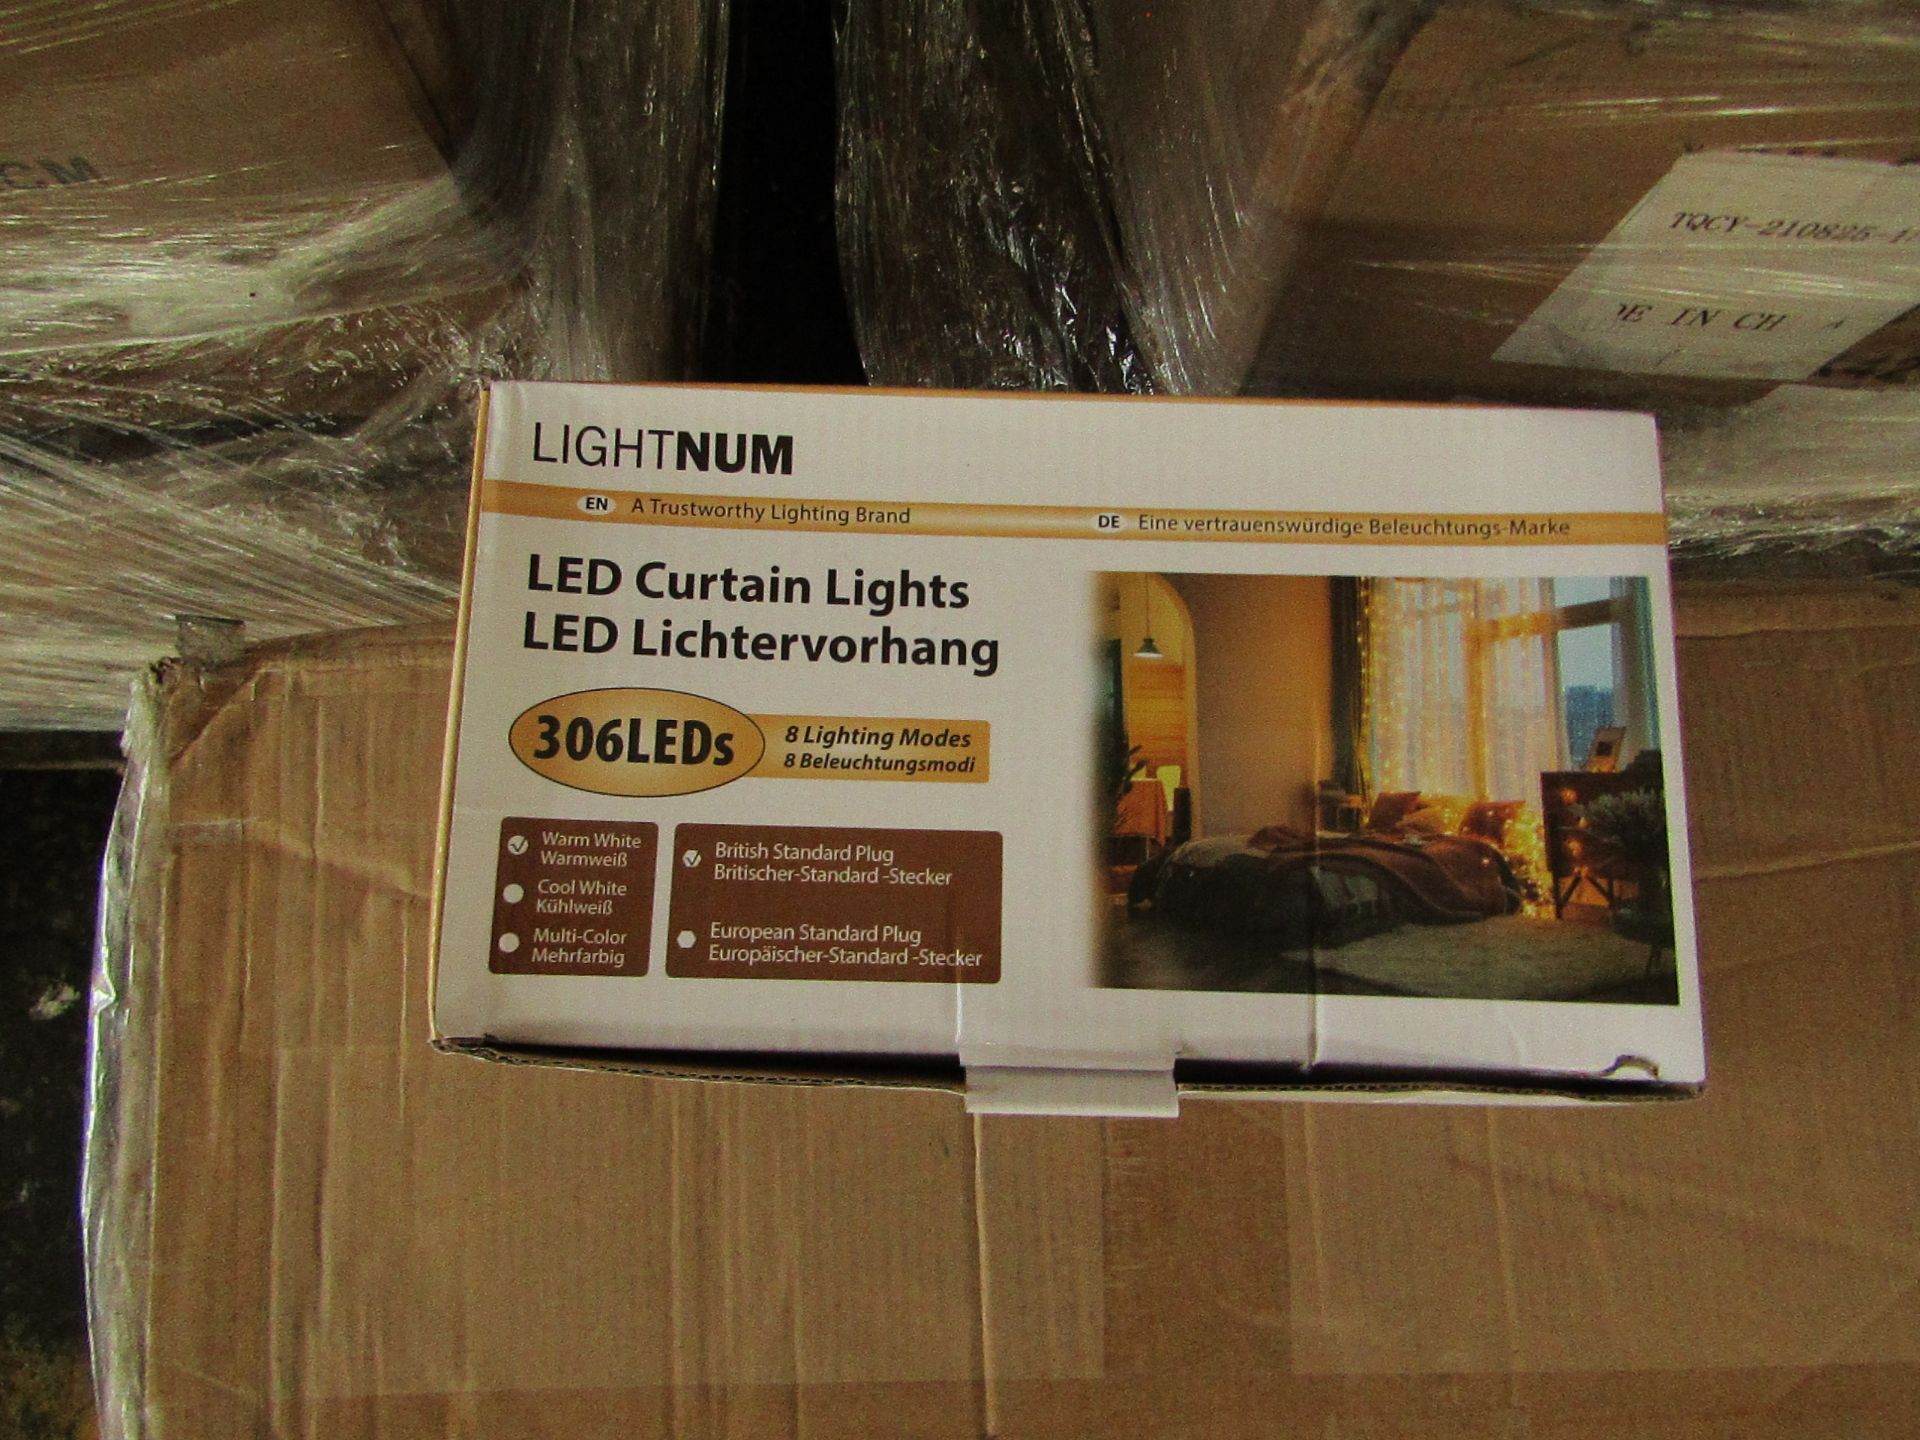 24x Lightnum LED 3mtr Light curtains with 306 LED and 8 modes, new and boxed.